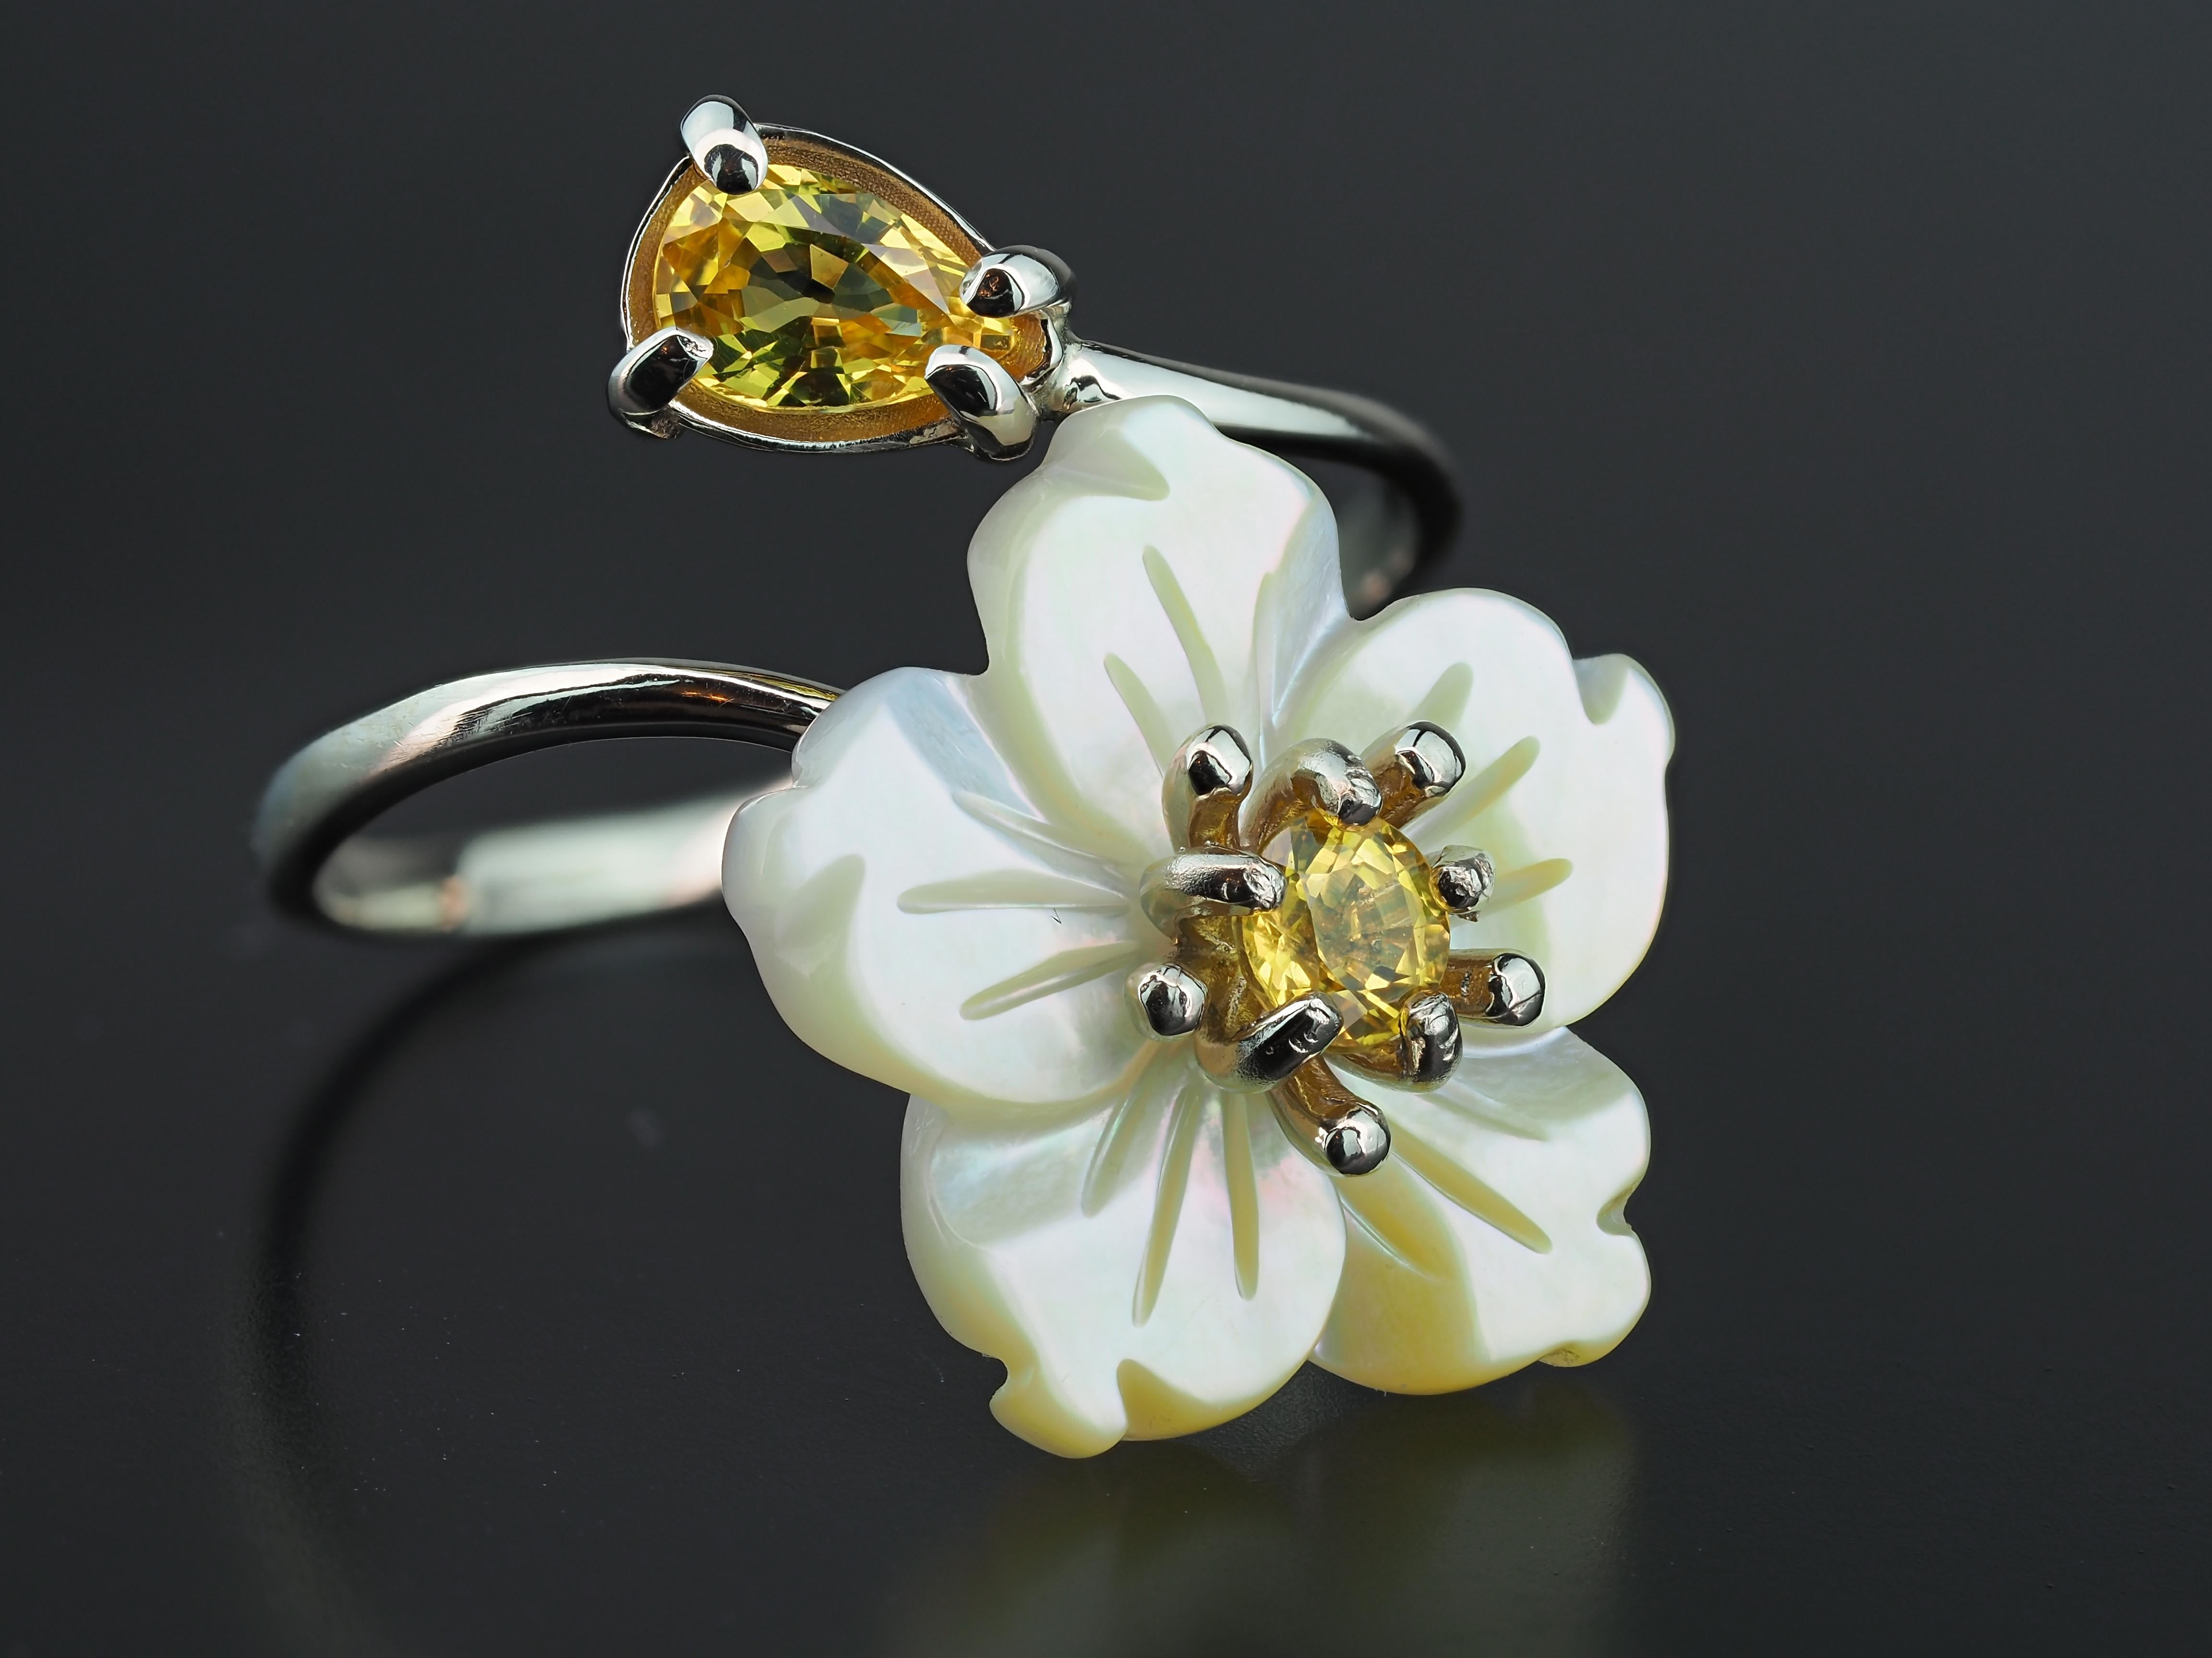 Yellow sapphire ring in 14k gold. Genuine sapphire gold ring. Sapphire gold ring. Pear sapphire ring. Yellow gemstone sapphire ring. Carved mother of pearl flower ring. Flower gold ring. Sapphire vintage ring. Nature inspired ring with mother of